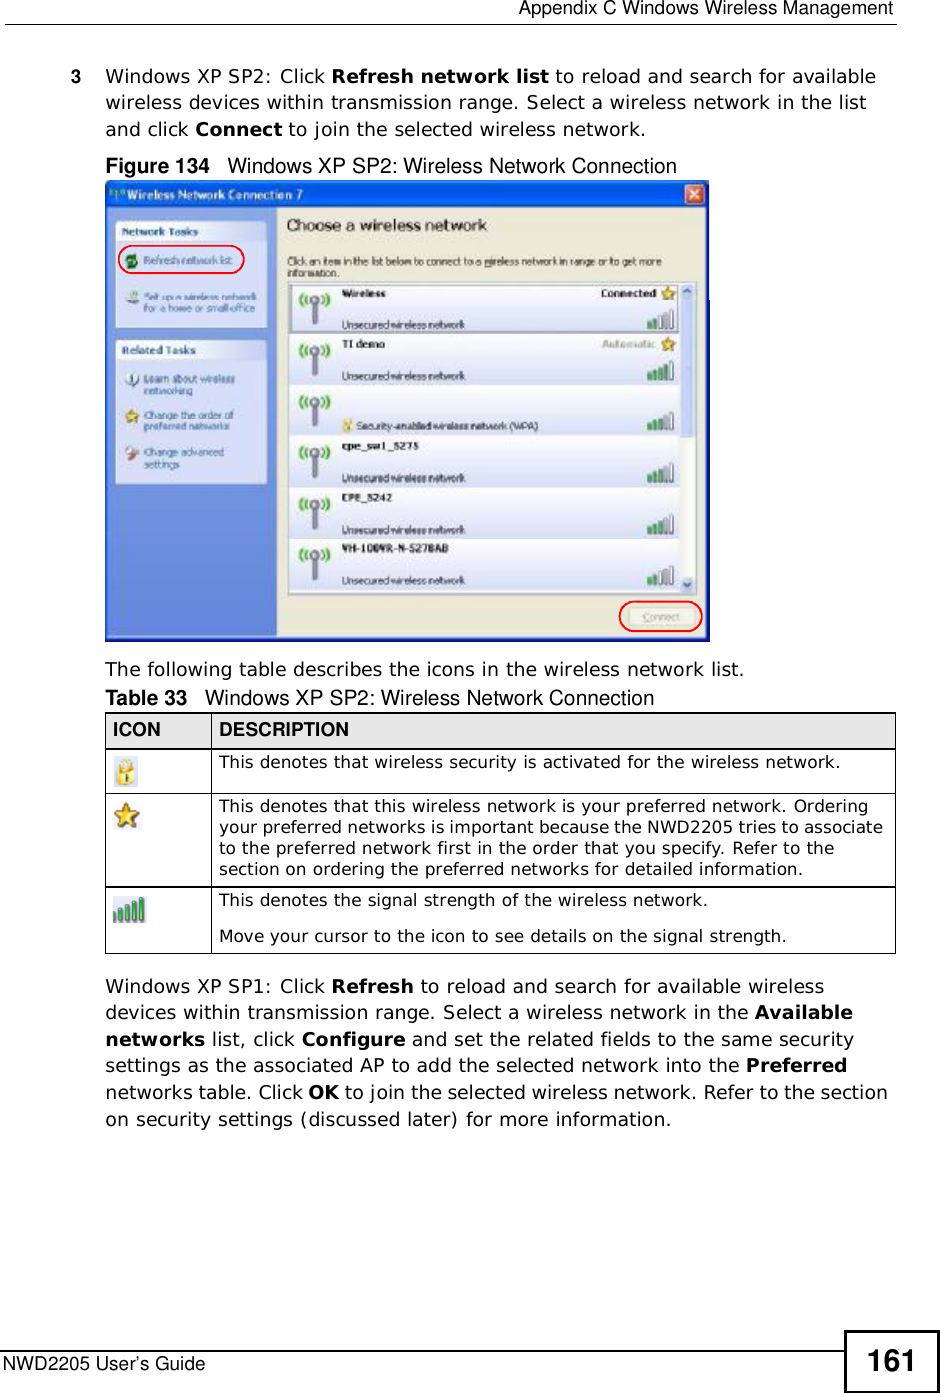  Appendix CWindows Wireless ManagementNWD2205 User’s Guide 1613Windows XP SP2: Click Refresh network list to reload and search for available wireless devices within transmission range. Select a wireless network in the list and click Connect to join the selected wireless network.Figure 134   Windows XP SP2: Wireless Network ConnectionThe following table describes the icons in the wireless network list.Windows XP SP1: Click Refresh to reload and search for available wireless devices within transmission range. Select a wireless network in the Available networks list, click Configure and set the related fields to the same security settings as the associated AP to add the selected network into the Preferred networks table. Click OK to join the selected wireless network. Refer to the section on security settings (discussed later) for more information. Table 33   Windows XP SP2: Wireless Network ConnectionICON DESCRIPTIONThis denotes that wireless security is activated for the wireless network.This denotes that this wireless network is your preferred network. Ordering your preferred networks is important because the NWD2205 tries to associate to the preferred network first in the order that you specify. Refer to the section on ordering the preferred networks for detailed information.This denotes the signal strength of the wireless network.Move your cursor to the icon to see details on the signal strength.